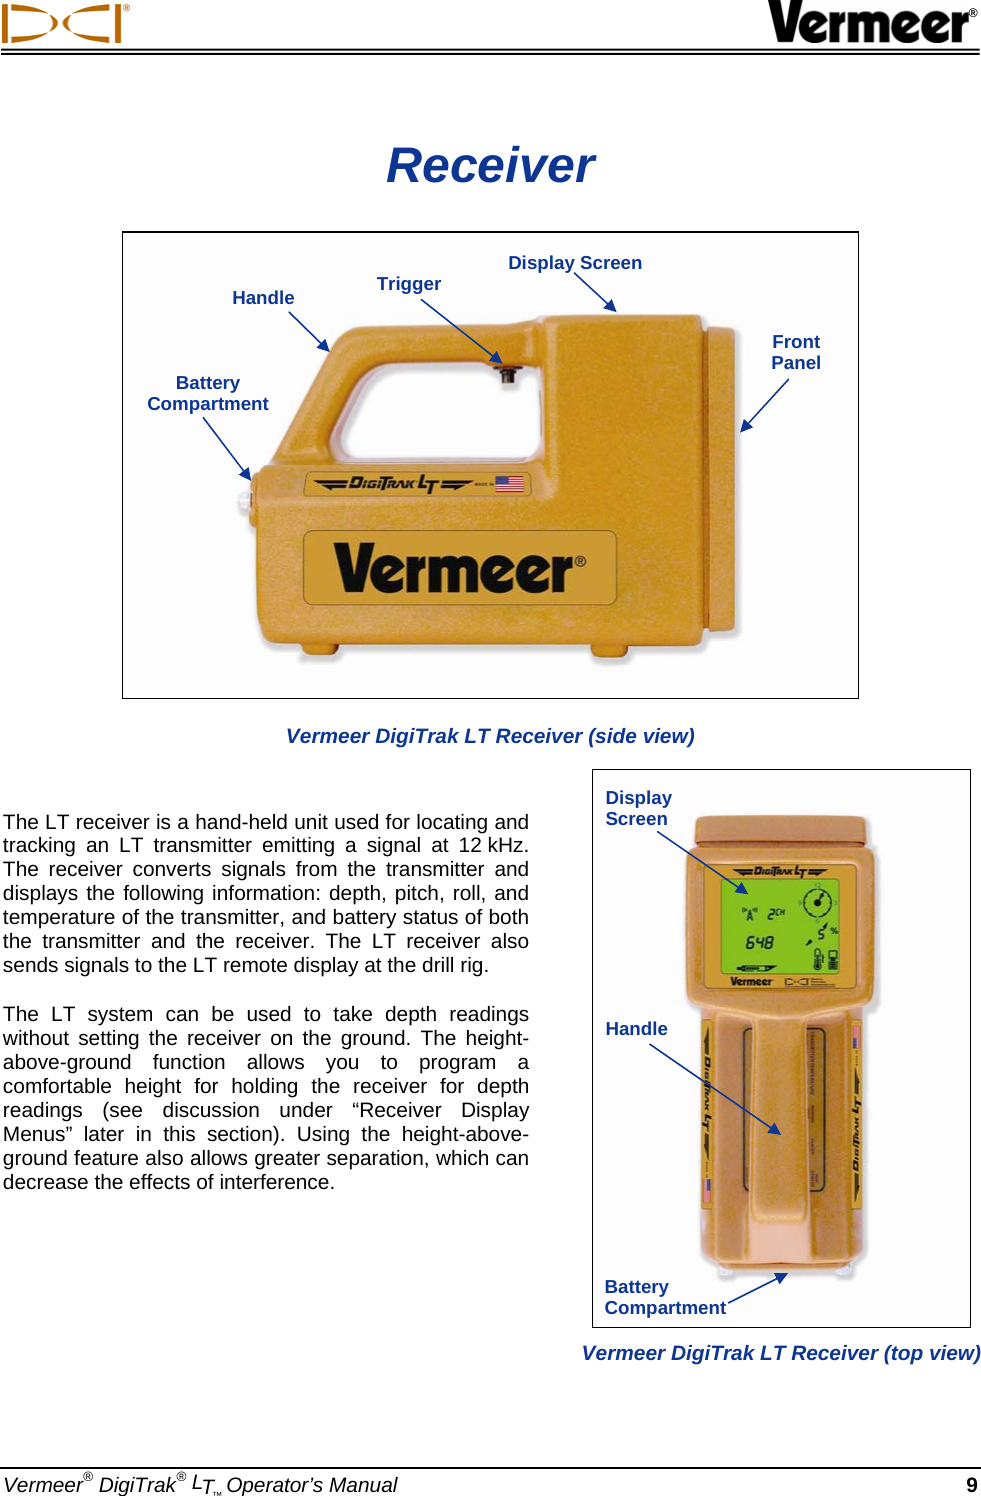  ® Vermeer® DigiTrak® LT™ Operator’s Manual 9 Receiver  Vermeer DigiTrak LT Receiver (side view)  The LT receiver is a hand-held unit used for locating and tracking an LT transmitter emitting a signal at 12 kHz. The receiver converts signals from the transmitter and displays the following information: depth, pitch, roll, and temperature of the transmitter, and battery status of both the transmitter and the receiver. The LT receiver also sends signals to the LT remote display at the drill rig. The LT system can be used to take depth readings without setting the receiver on the ground. The height-above-ground function allows you to program a comfortable height for holding the receiver for depth readings (see discussion under “Receiver Display Menus” later in this section). Using the height-above-ground feature also allows greater separation, which can decrease the effects of interference.    Handle  Trigger  Display ScreenFront  Panel Battery Compartment  Vermeer DigiTrak LT Receiver (top view) Display Screen Handle Battery Compartment 